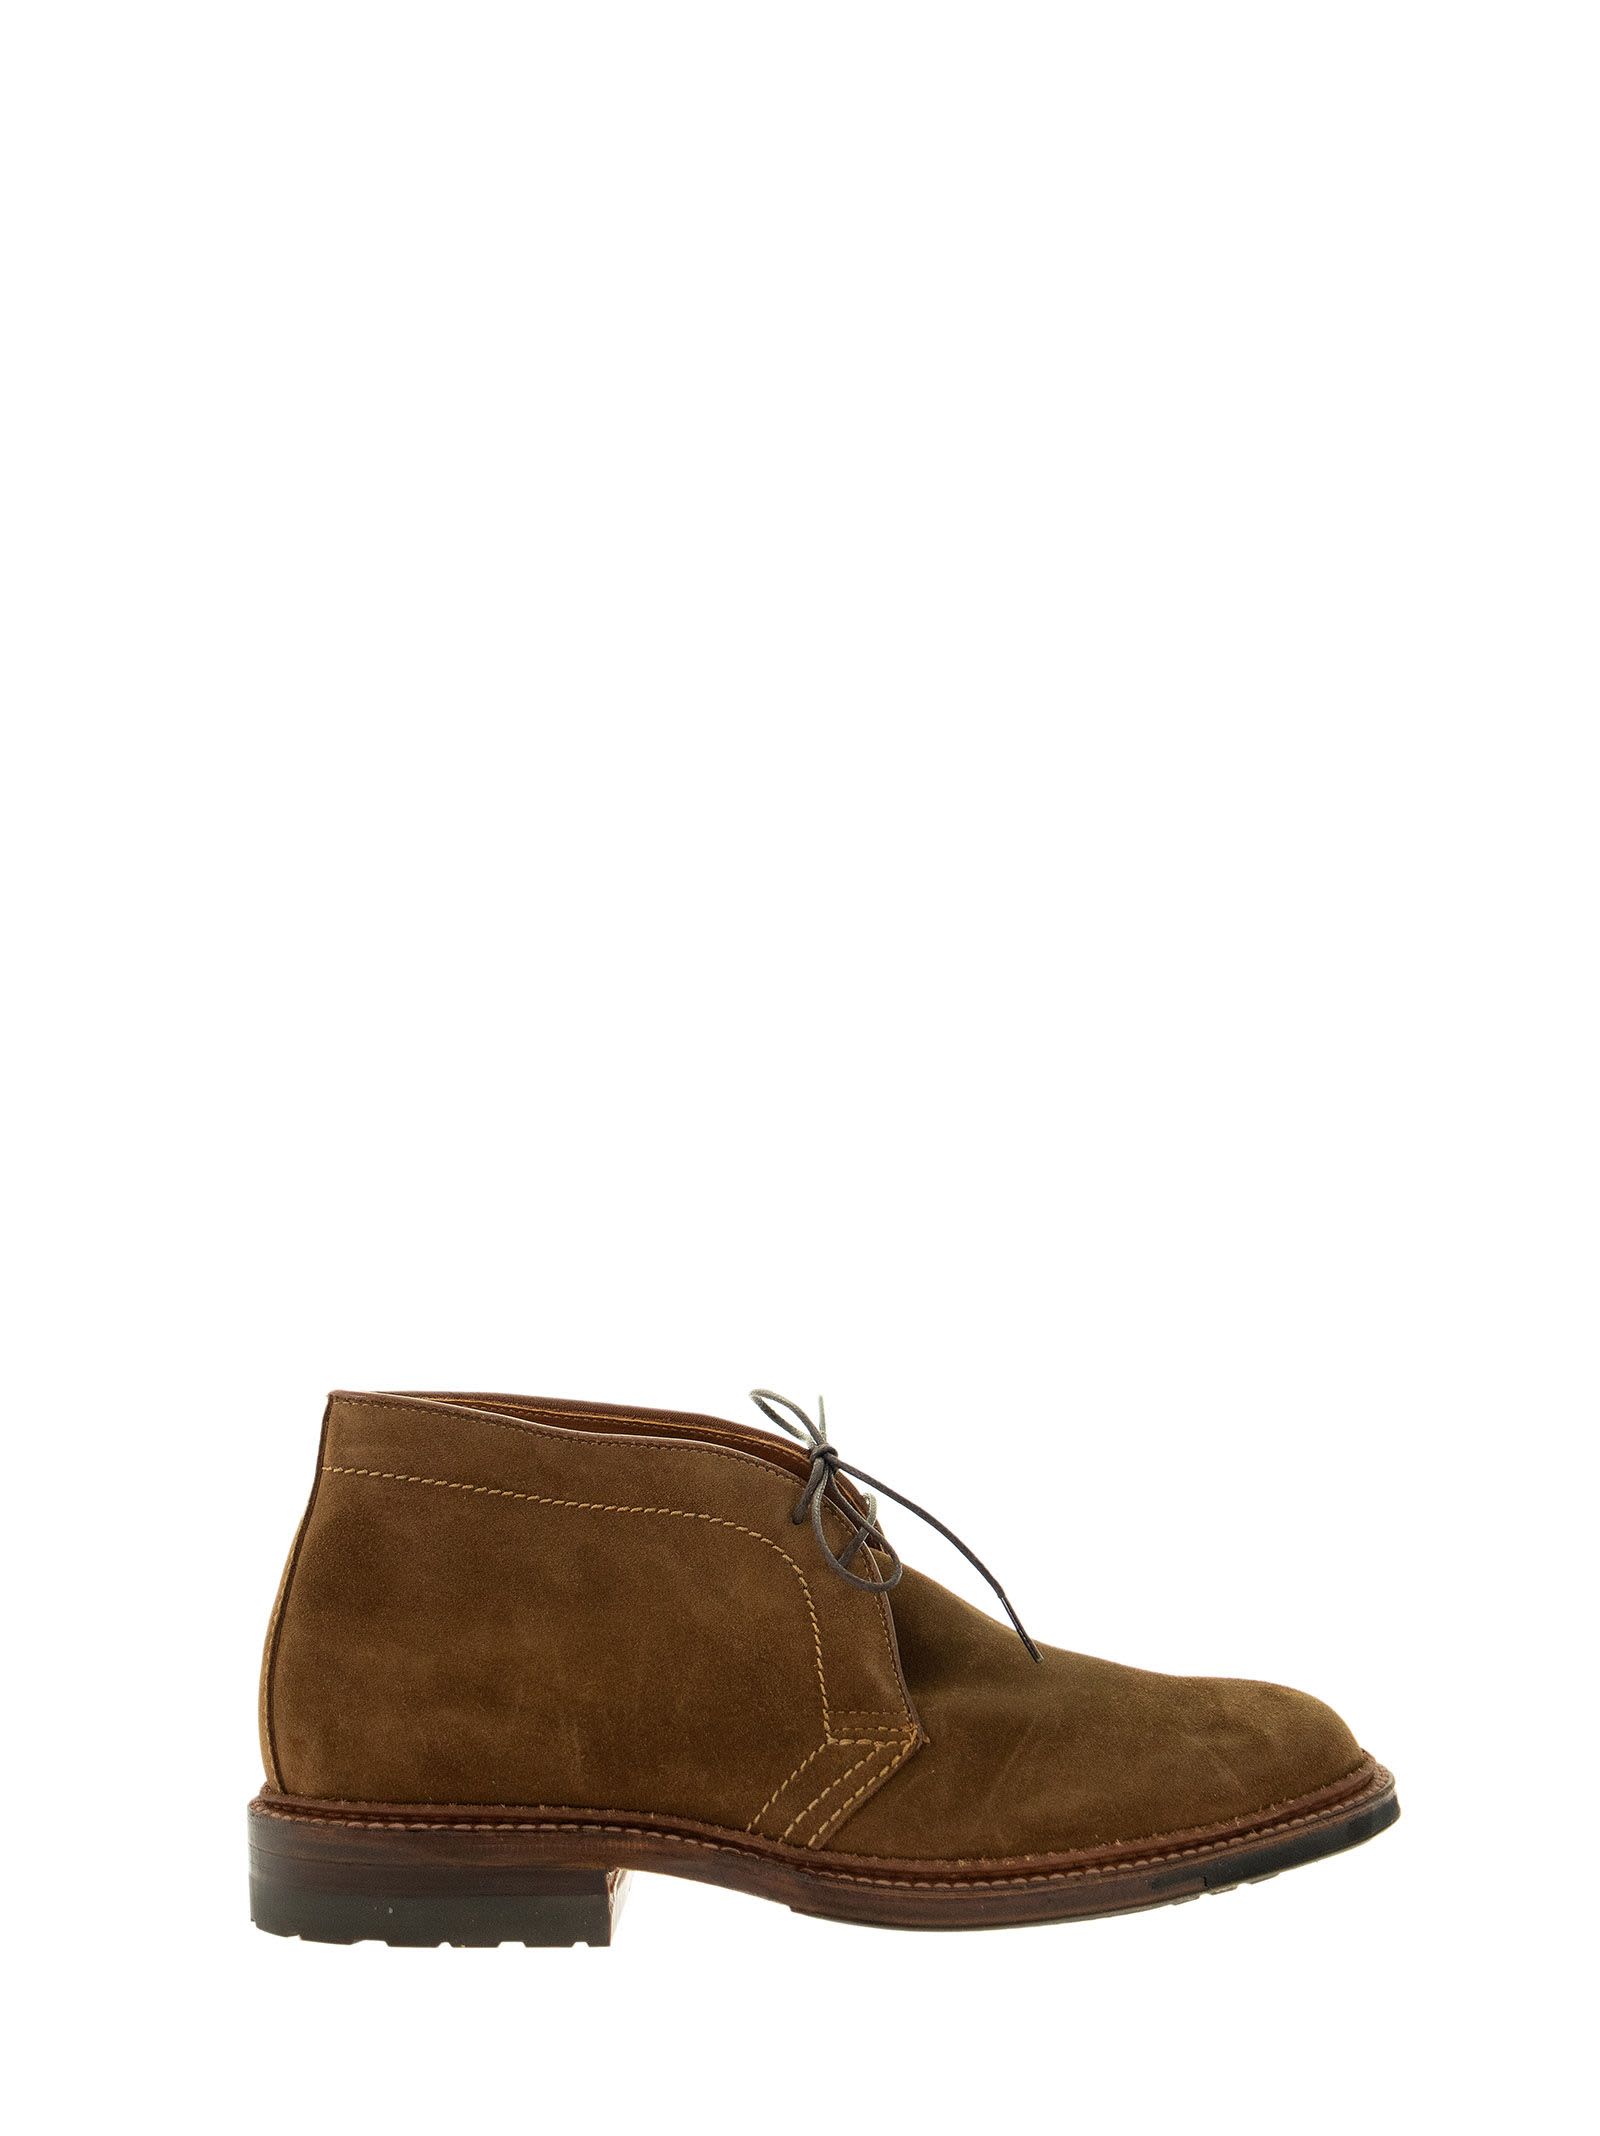 Alden Chukka - Suede Ankle Boot